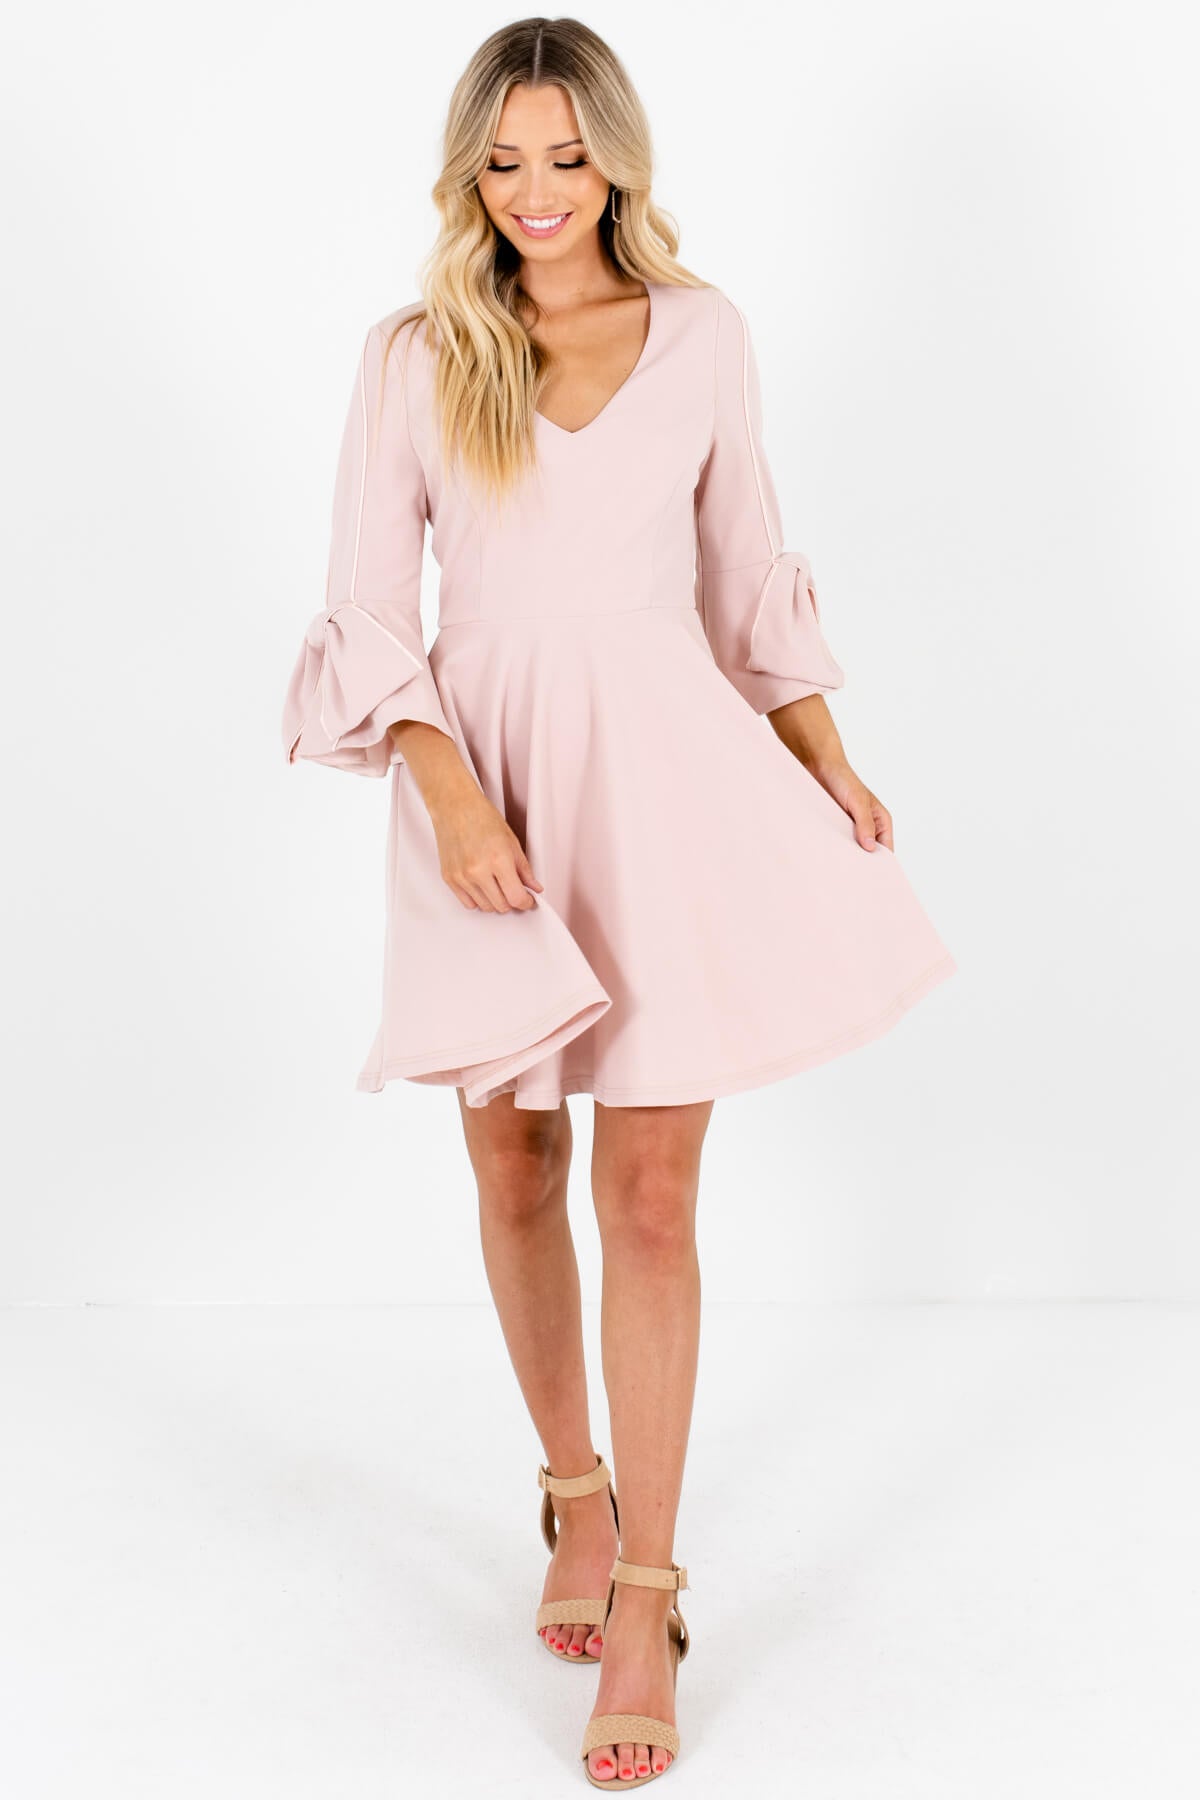 Blush Pink Cute Bow Sleeve Pleated Mini Dresses for Women